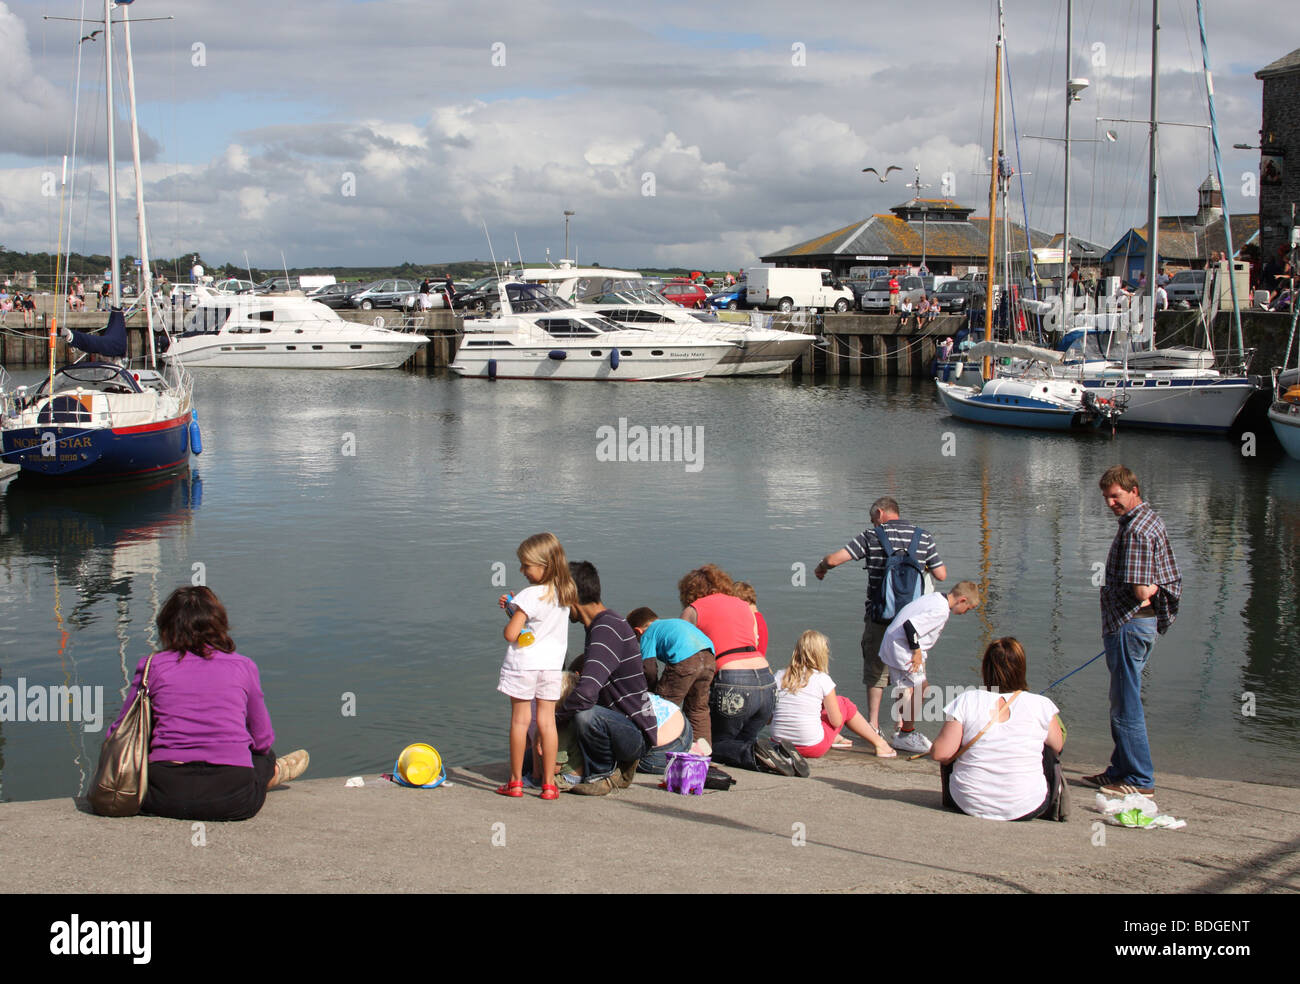 Families crab fishing at Padstow Harbour, Padstow, North Cornwall, England, U.K. Stock Photo